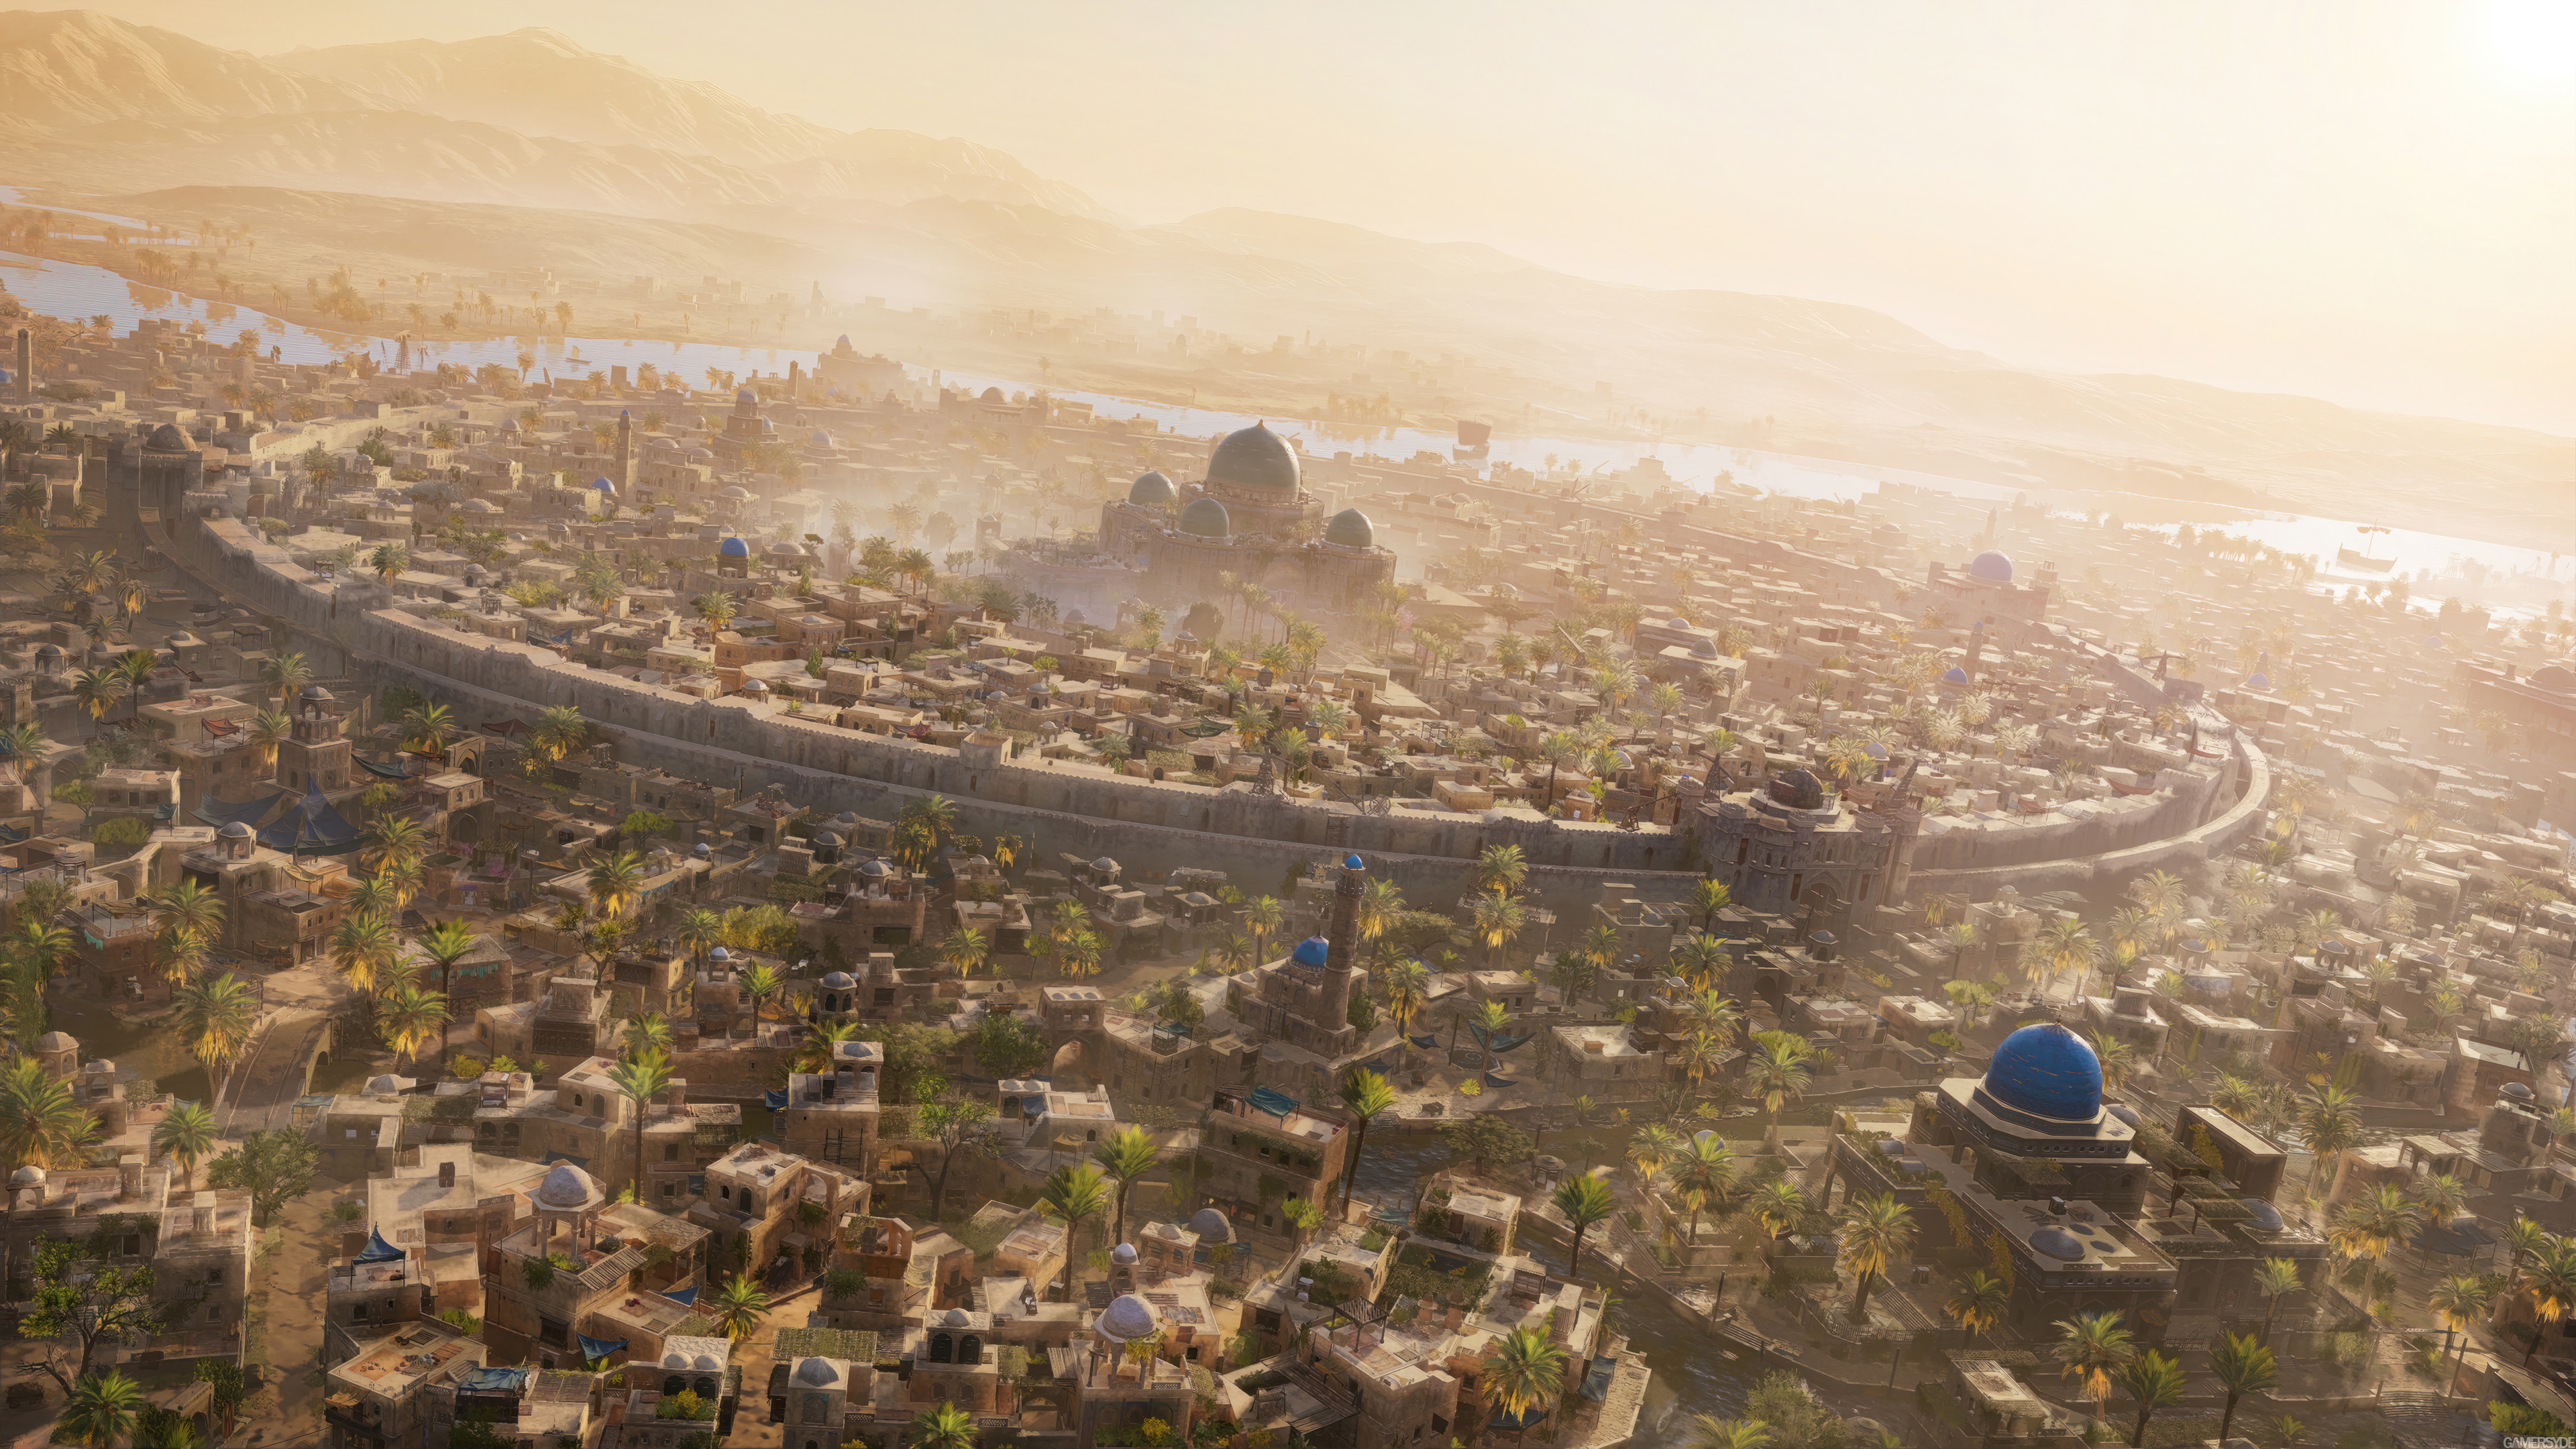 HD desktop wallpaper from the video game Assassin's Creed Mirage depicting a panoramic view of an ancient city at sunrise.